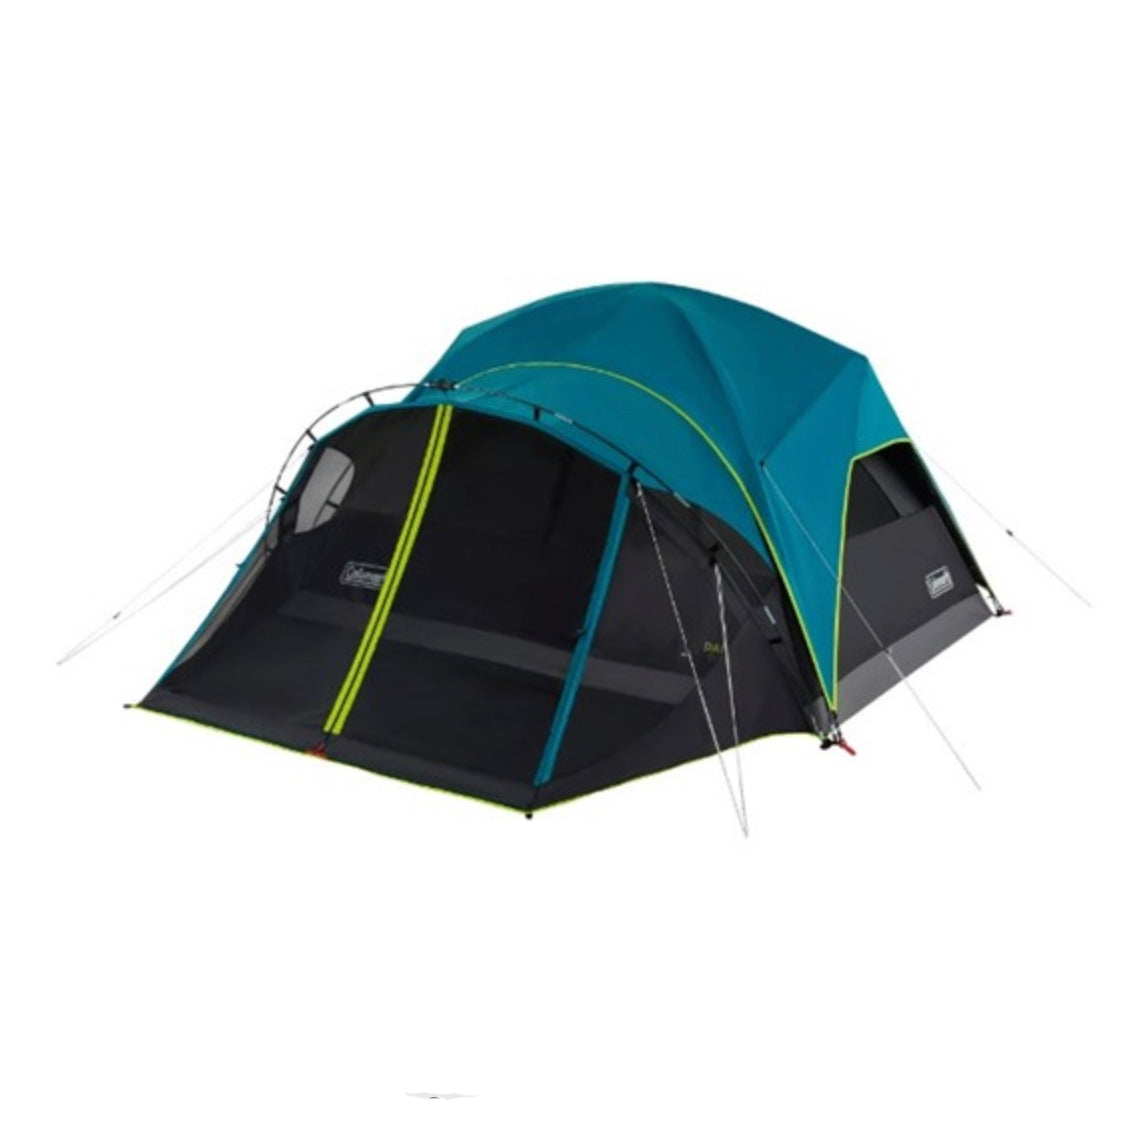 Coleman Carlsbad 4 Person Tent (20200821) - Black/Teal/Green